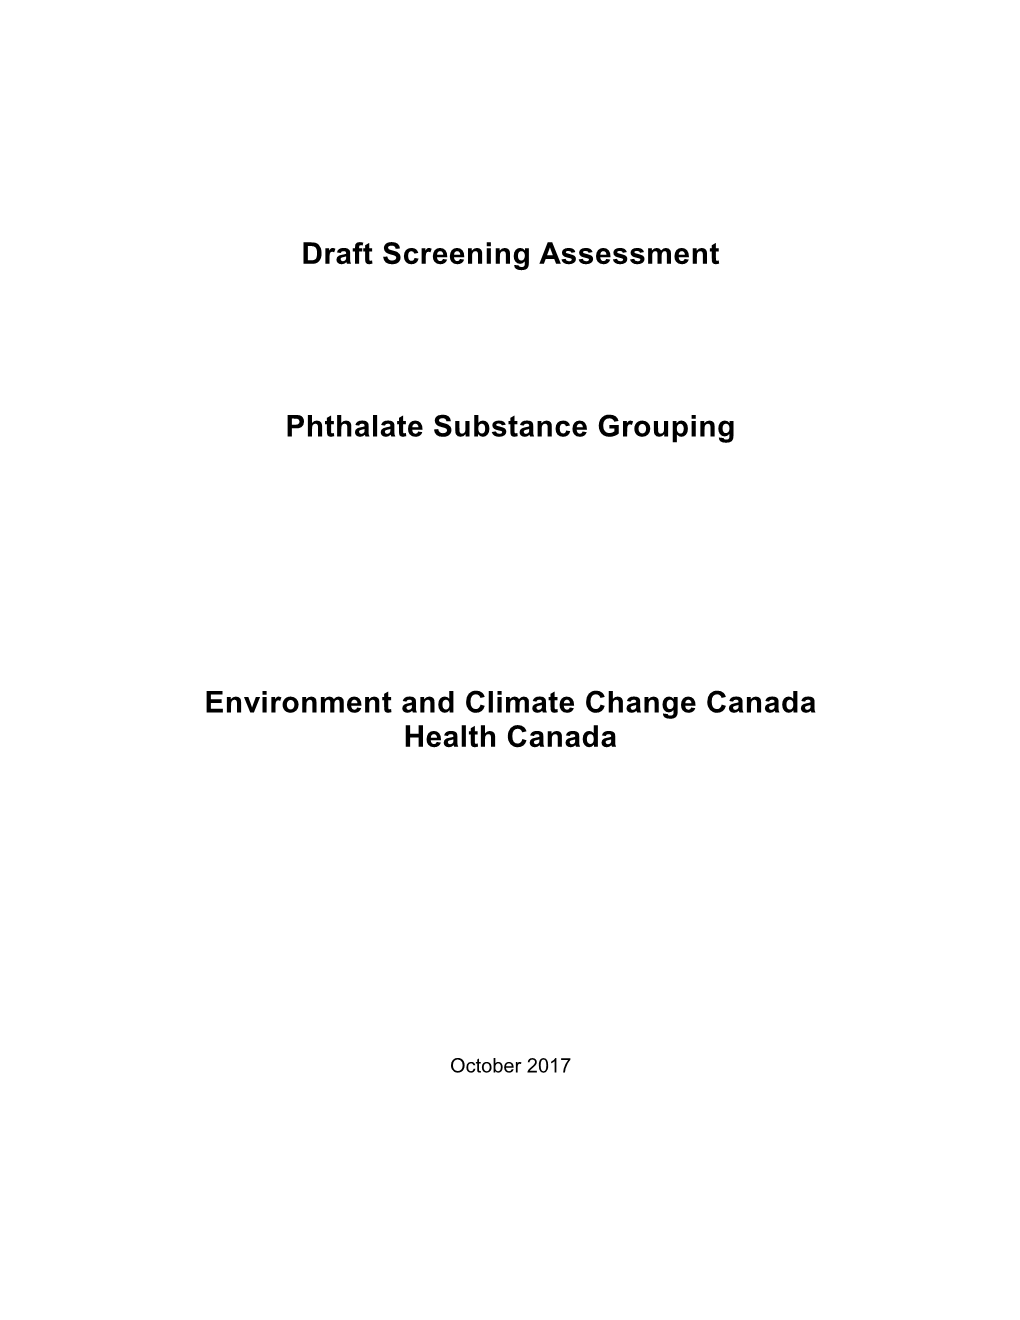 Draft Screening Assessment- Phthalate Substance Grouping